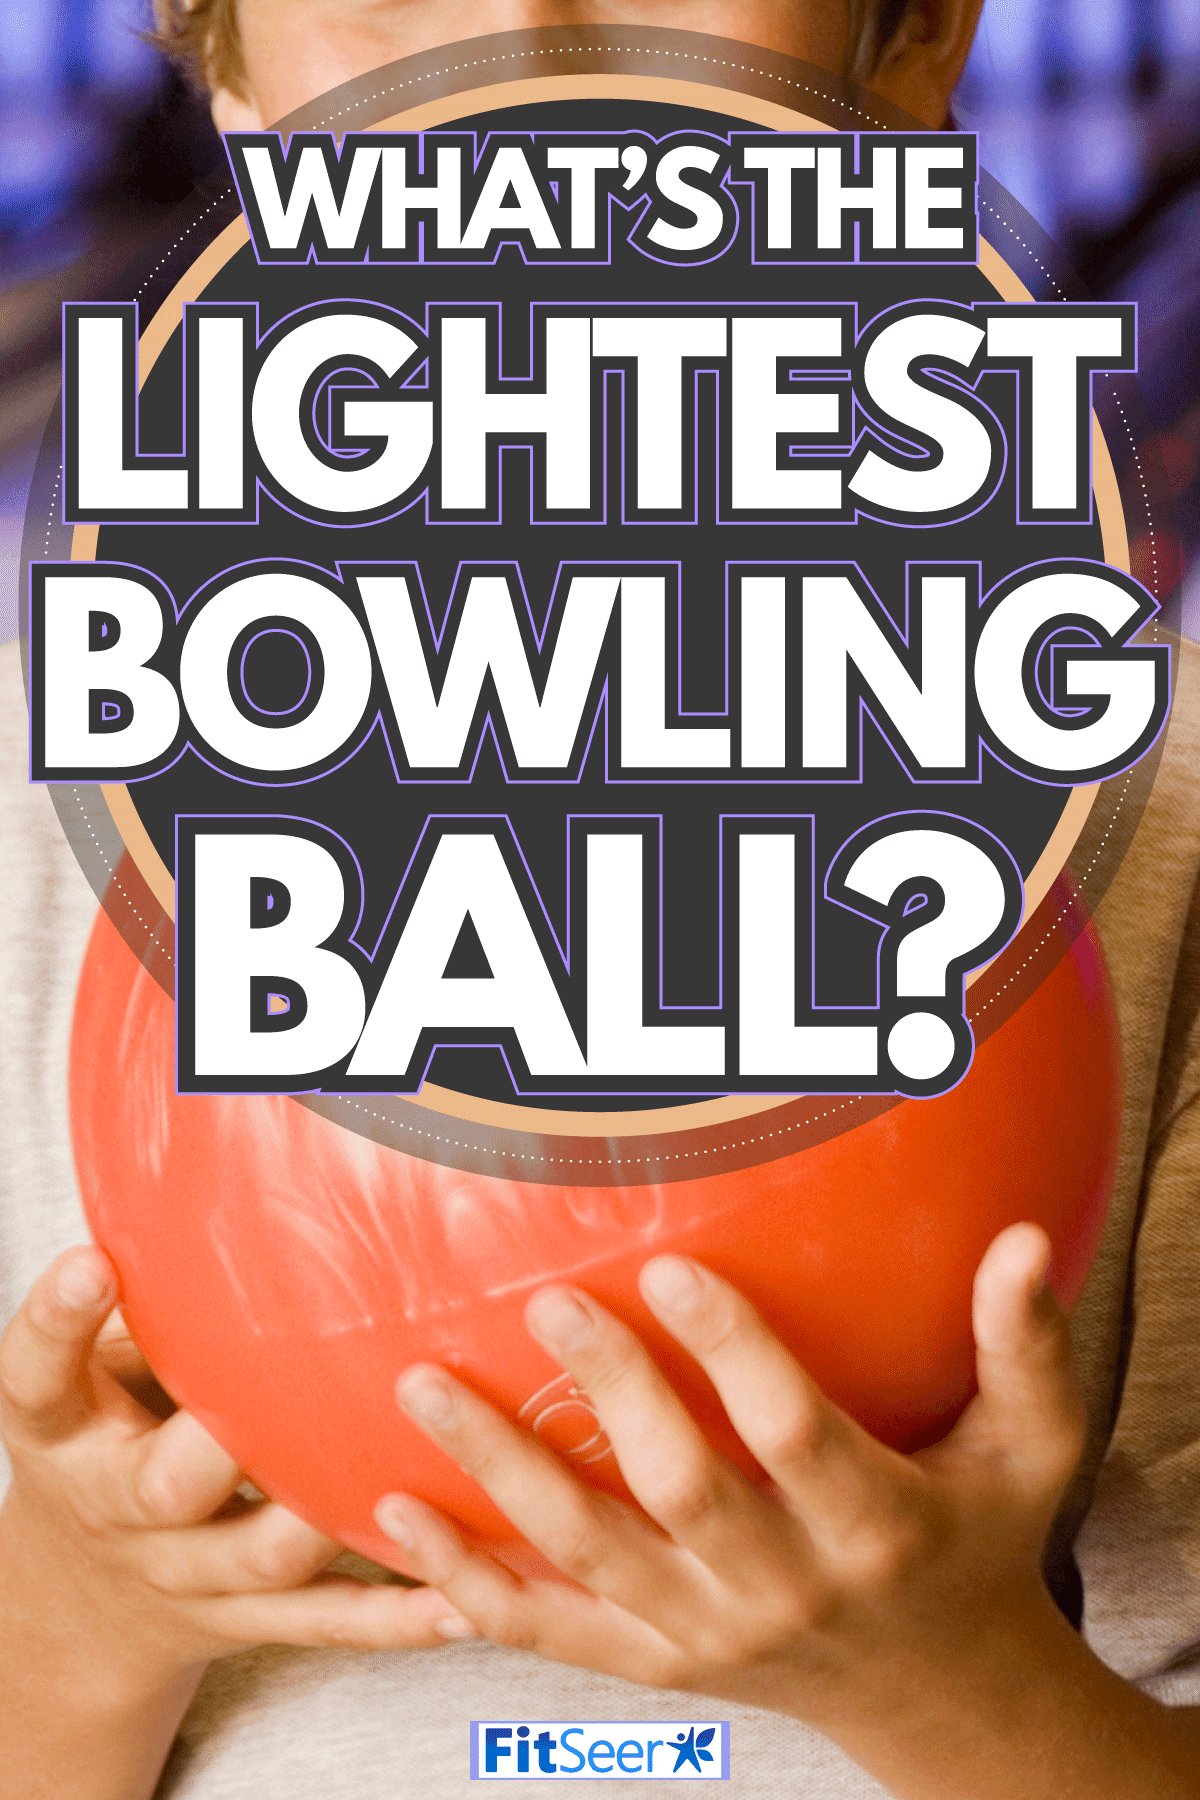 Bowling ball in a hand in a bowling alley, What's The Lightest Bowling Ball?